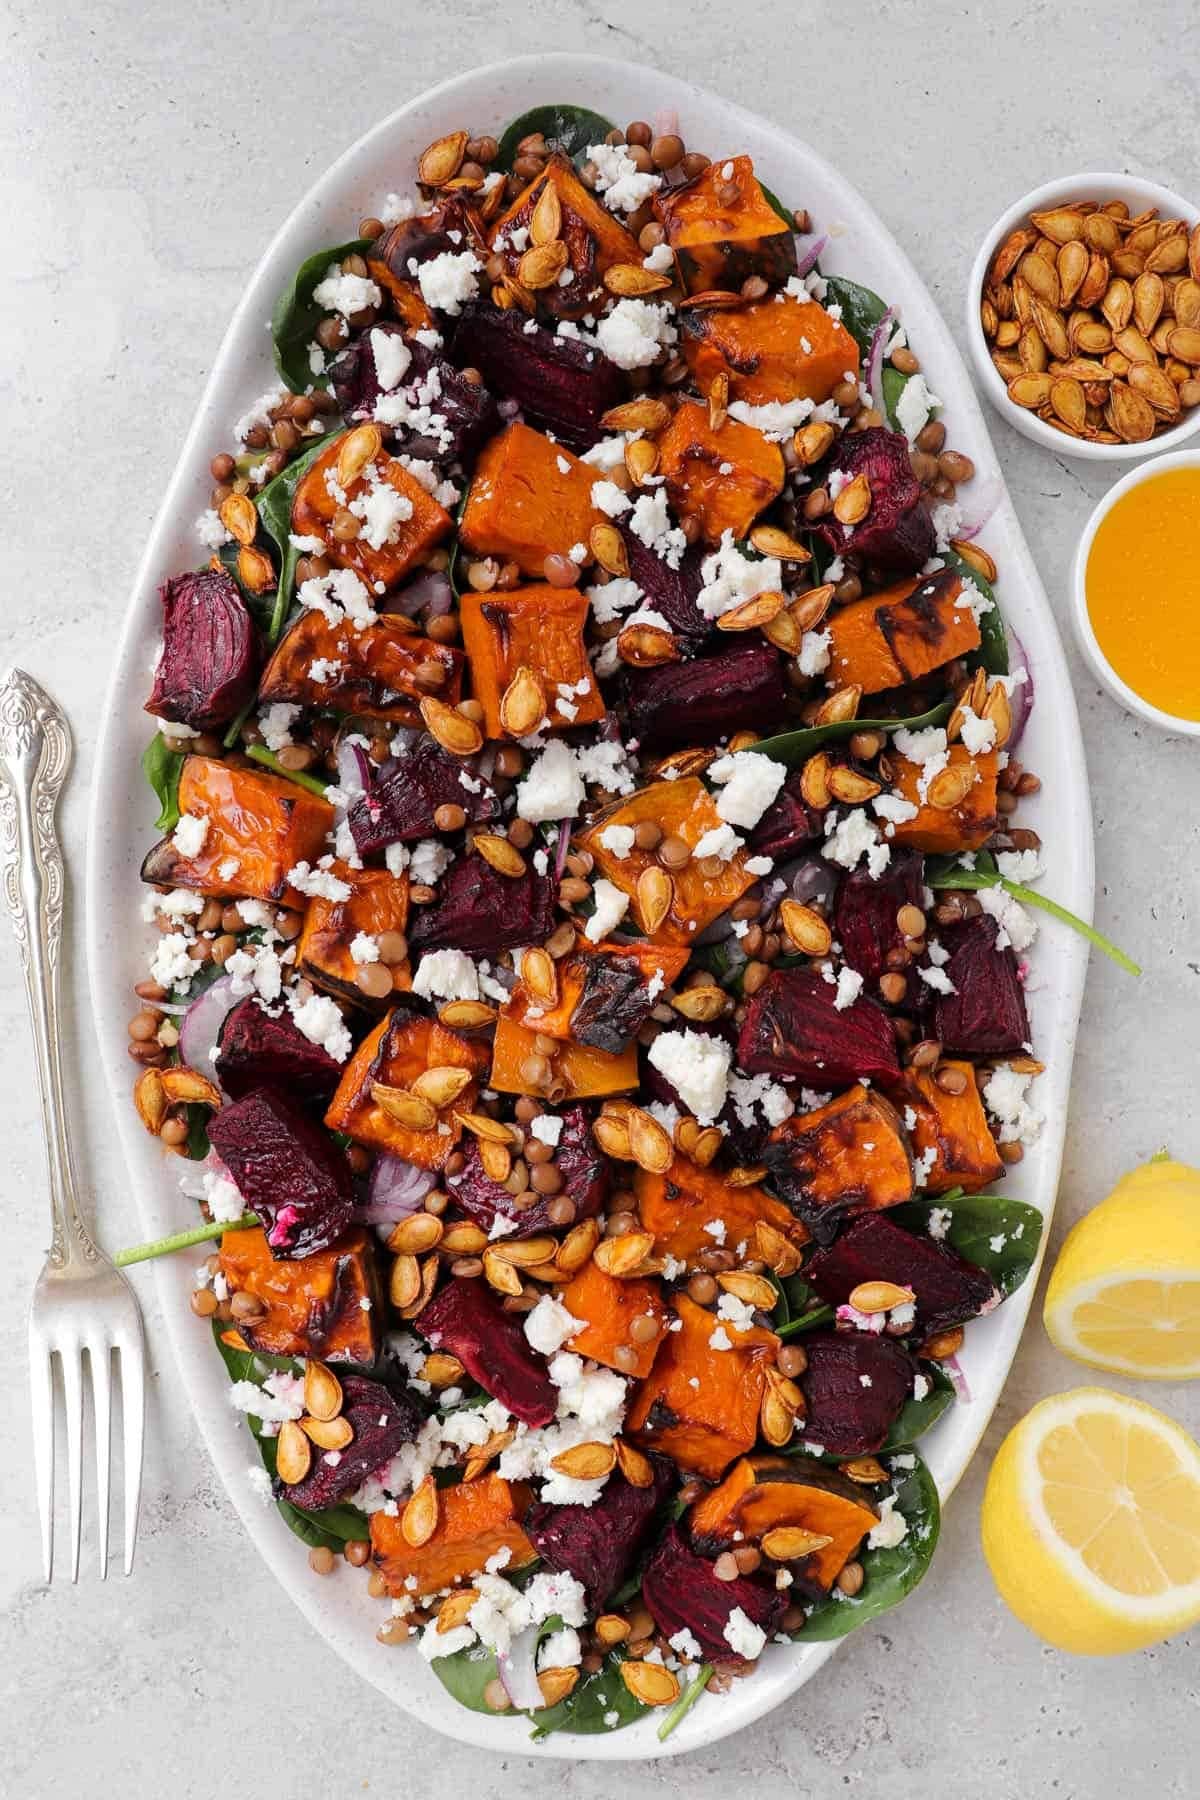 Roasted beetroot and pumpkin salad in a plate made with roasted pumpkin, beets, spinach, lentils, and feta. 